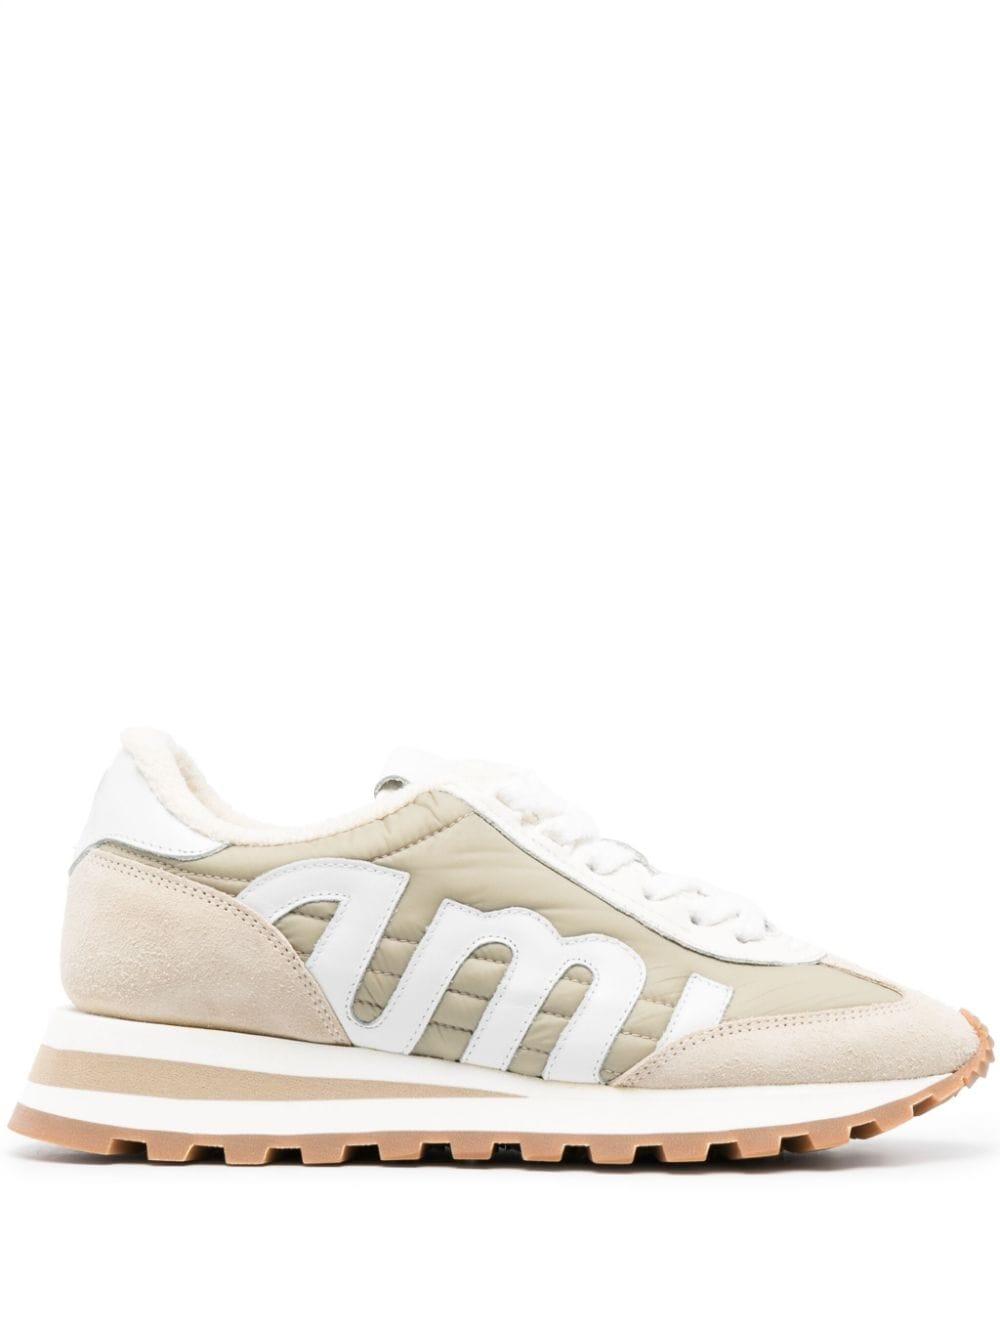 Ami Paris Rush Logo-patch Sneakers in White | Lyst